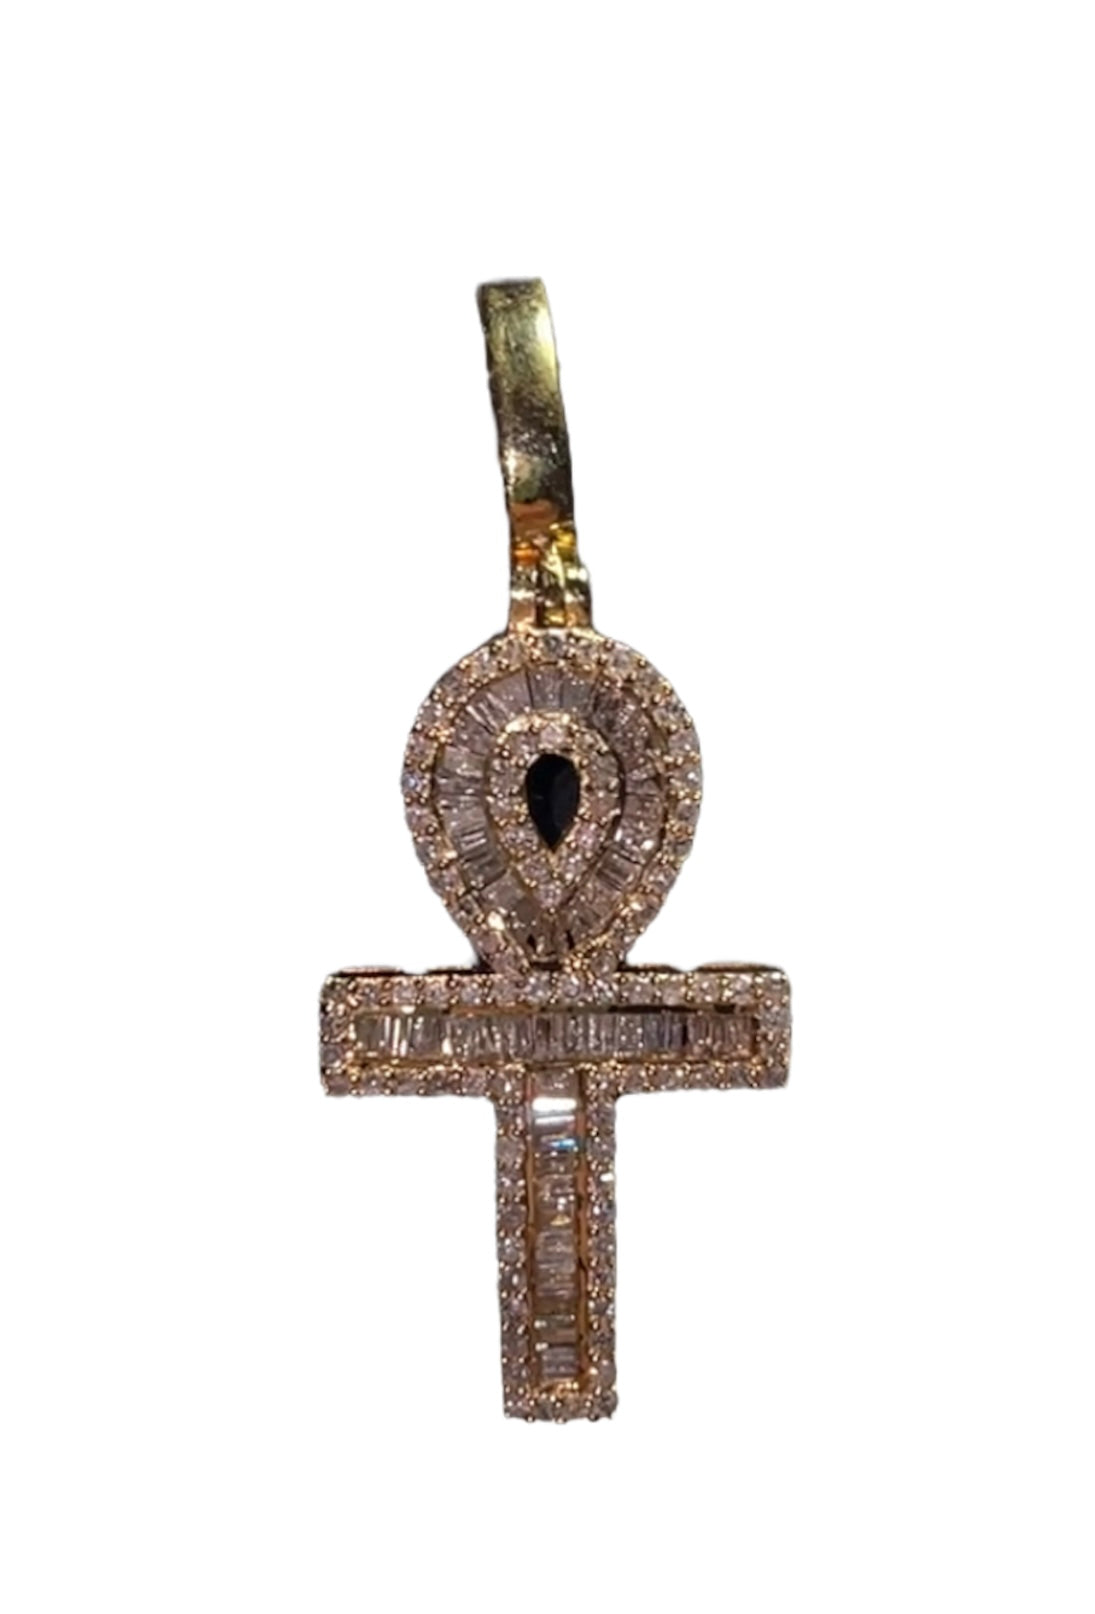 Diamond Ankh Pendant - 0.50 Carats, Round & Baguette Cut in 10KT Yellow Gold